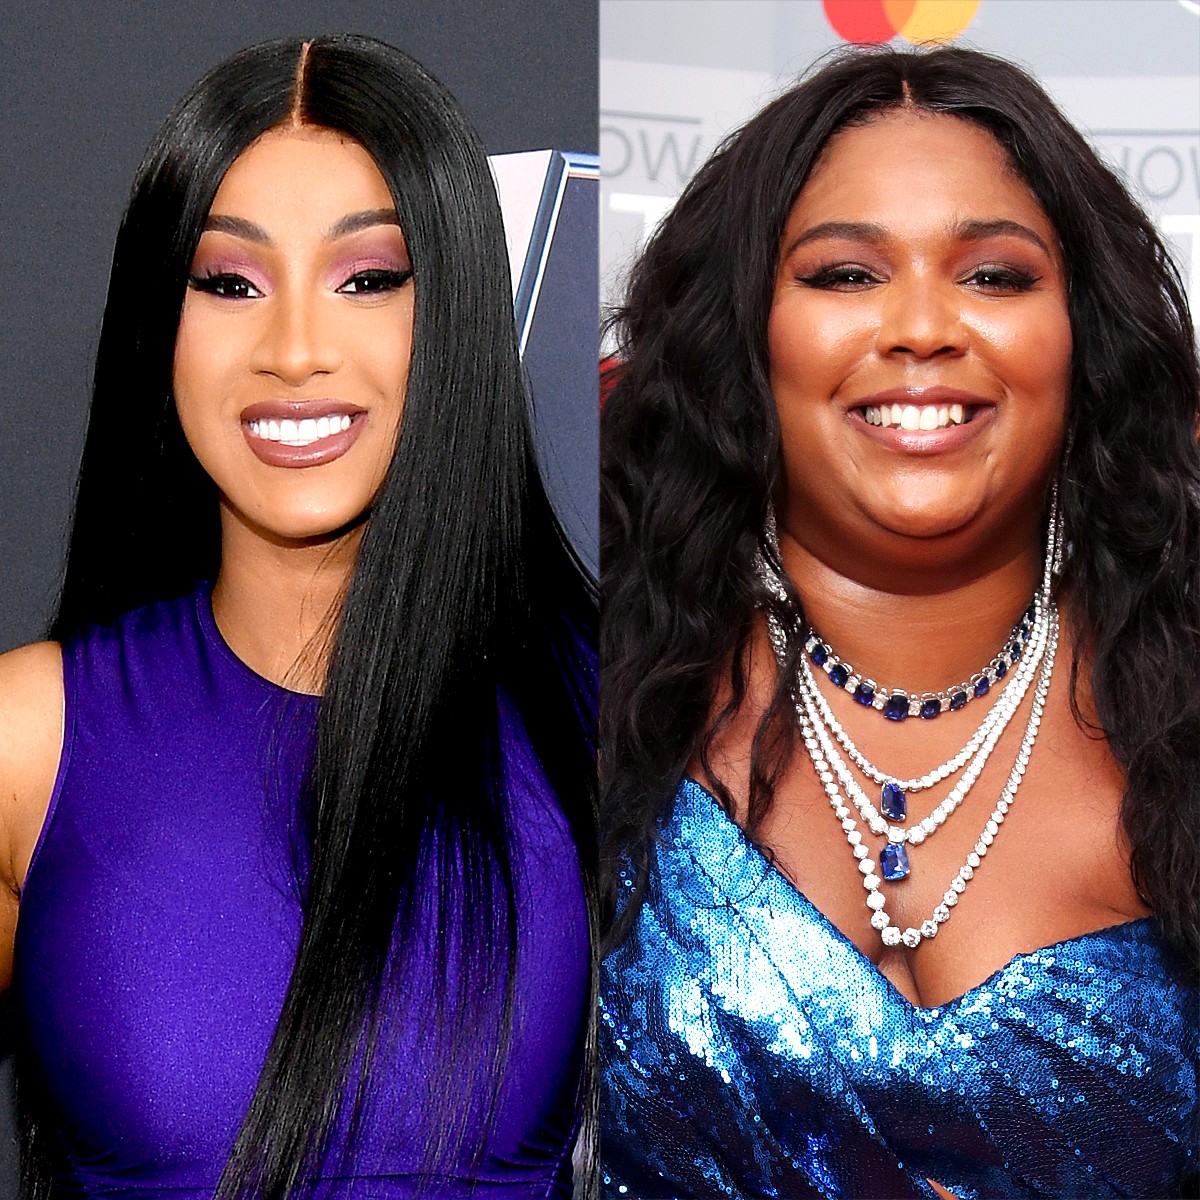 https://akns-images.eonline.com/eol_images/Entire_Site/2020816/rs_1200x1200-200916093528-1200-Cardi-B-Lizzo.jpg?fit=around%7C1200:1200&output-quality=90&crop=1200:1200;center,top